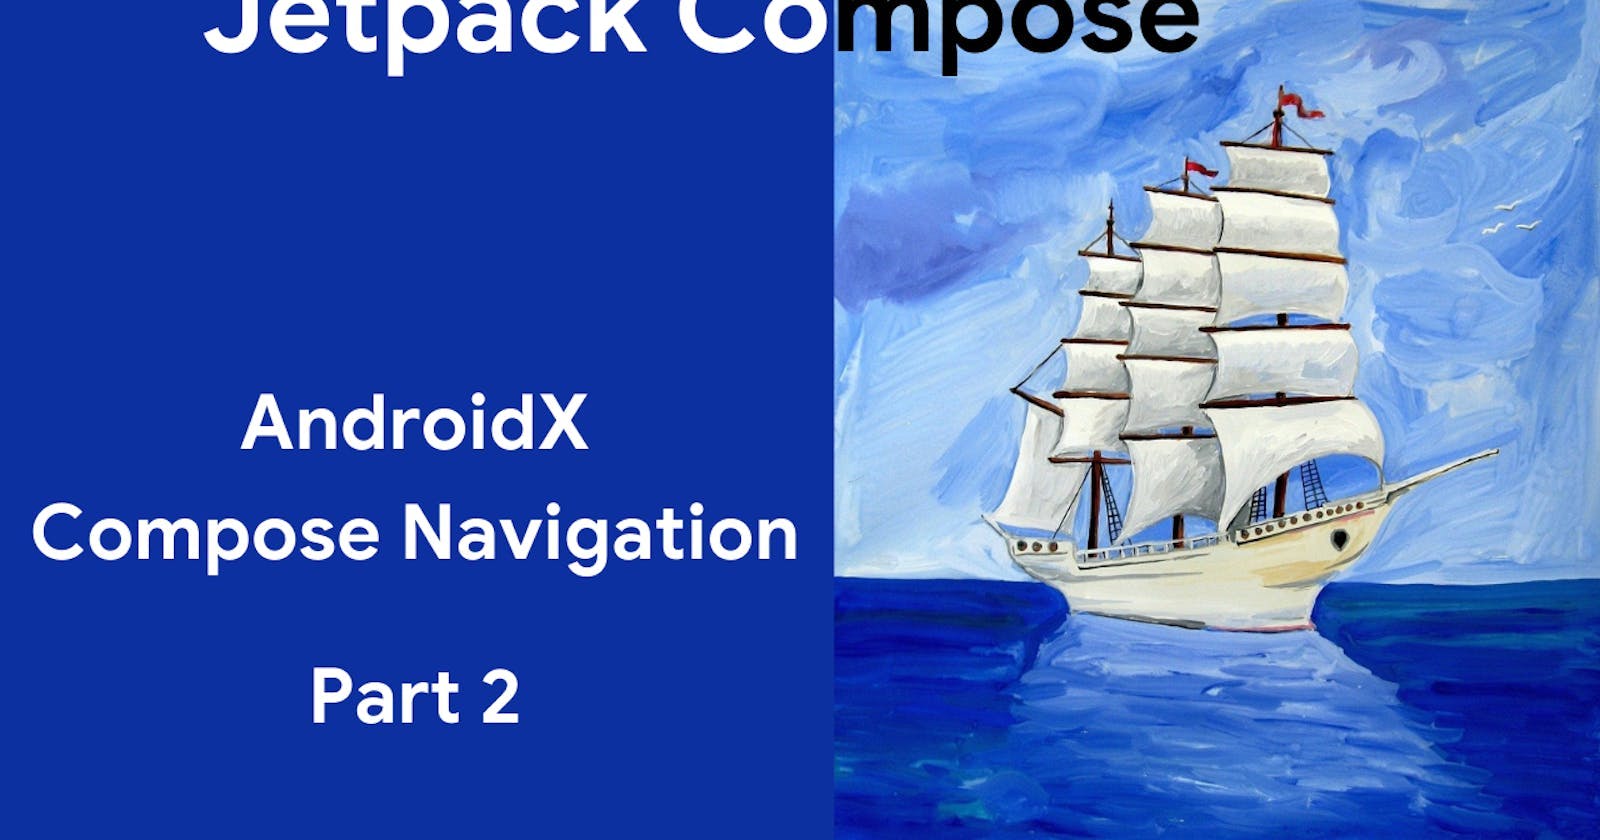 Step by Step Guide to Setup AndroidX Compose Navigation: Part 2